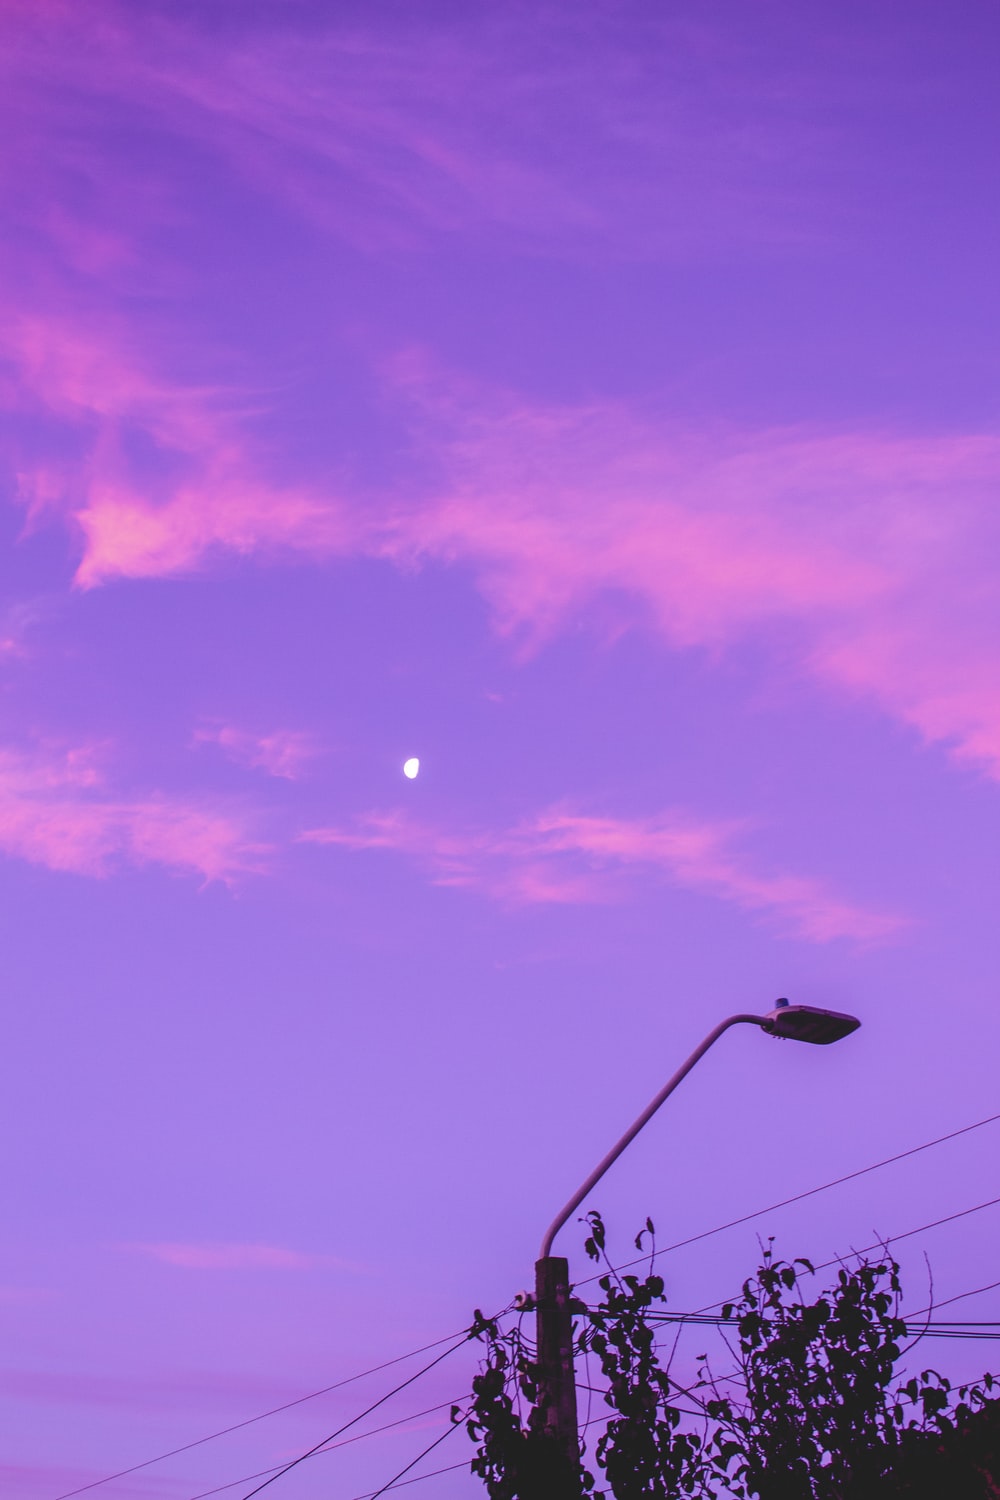 Purple Aesthetic Picture. Download Free Image